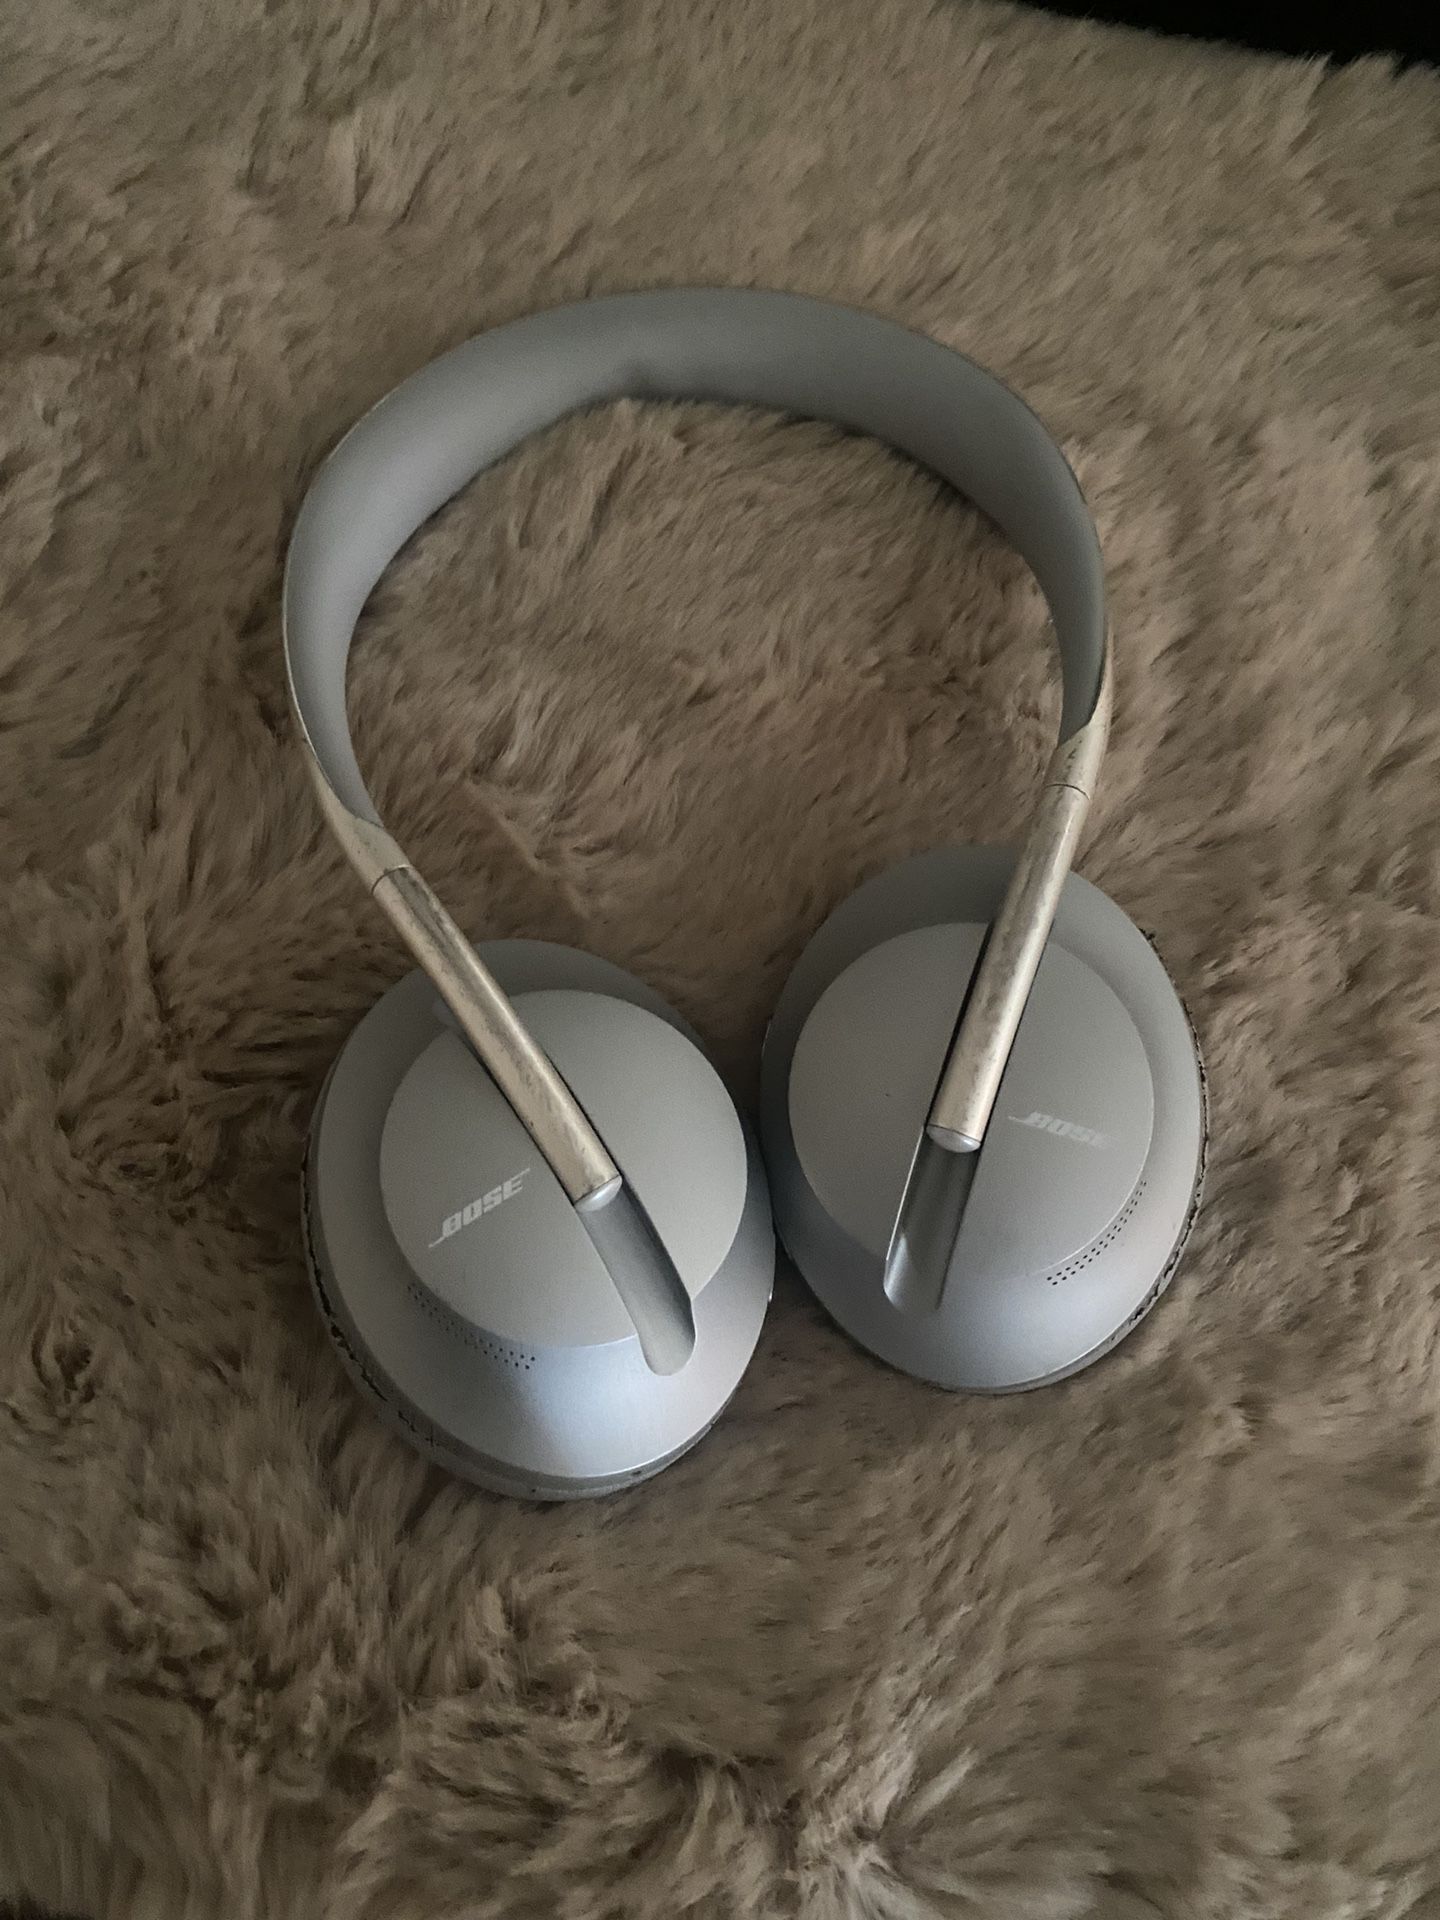 Bose Noise, Cancelling Over-Ear Bluetooth Wireless Headphones 700